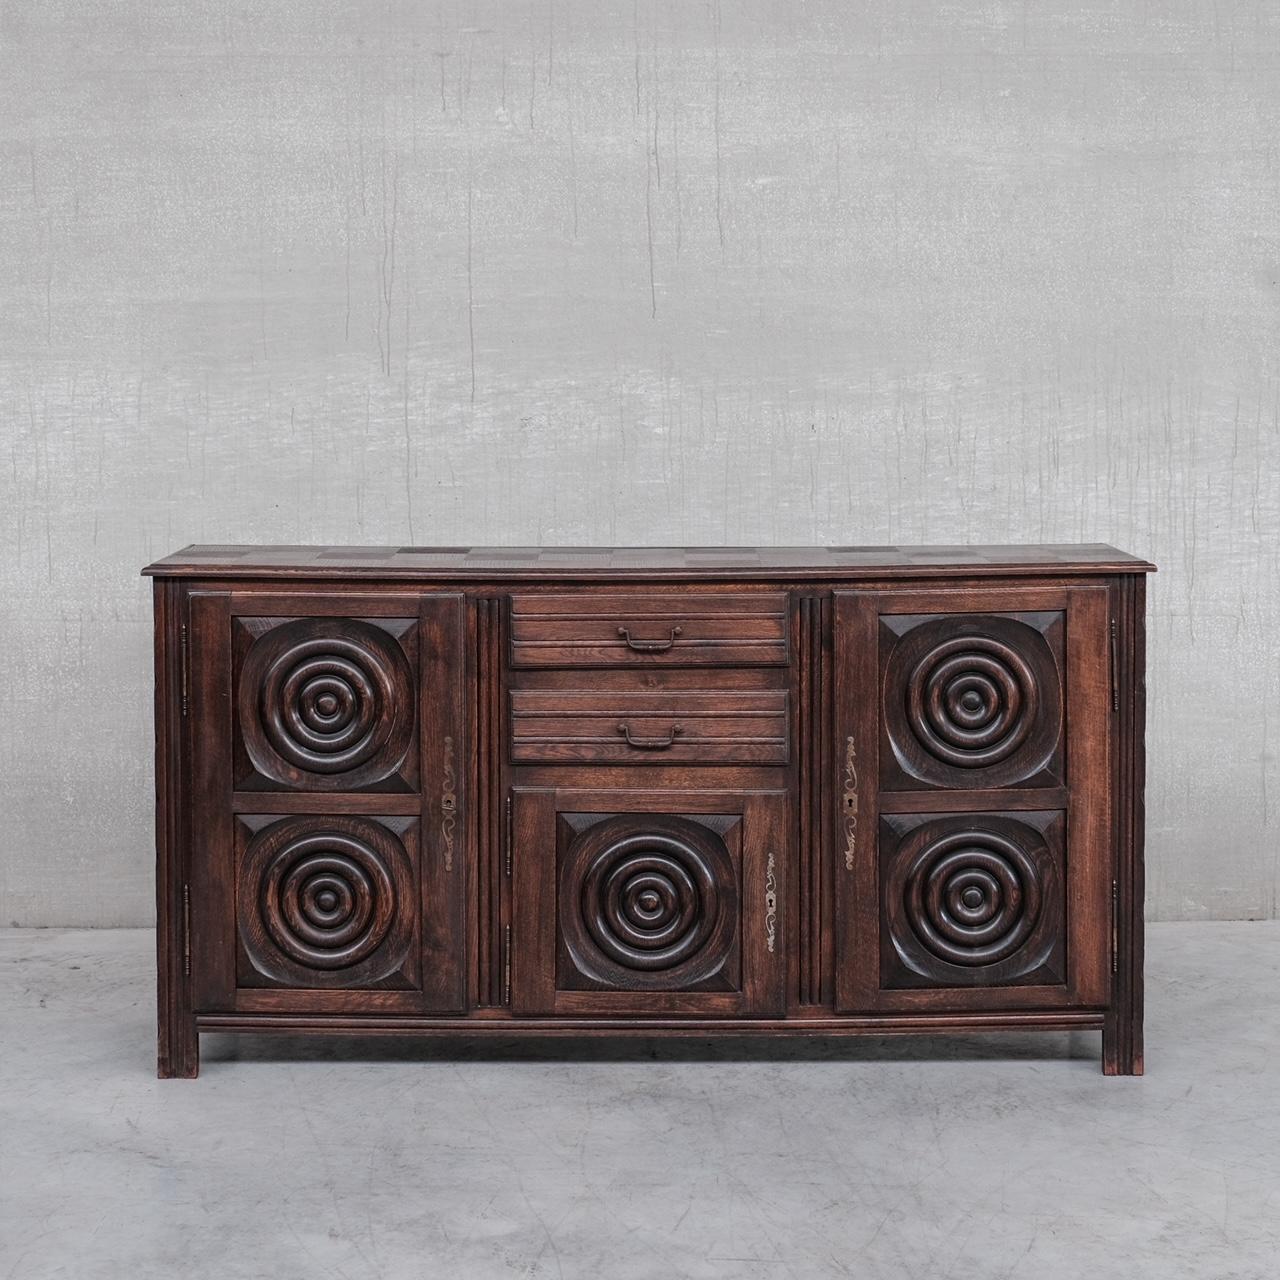 Oak Dudouyt Style Art Deco French Sideboard or Credenza